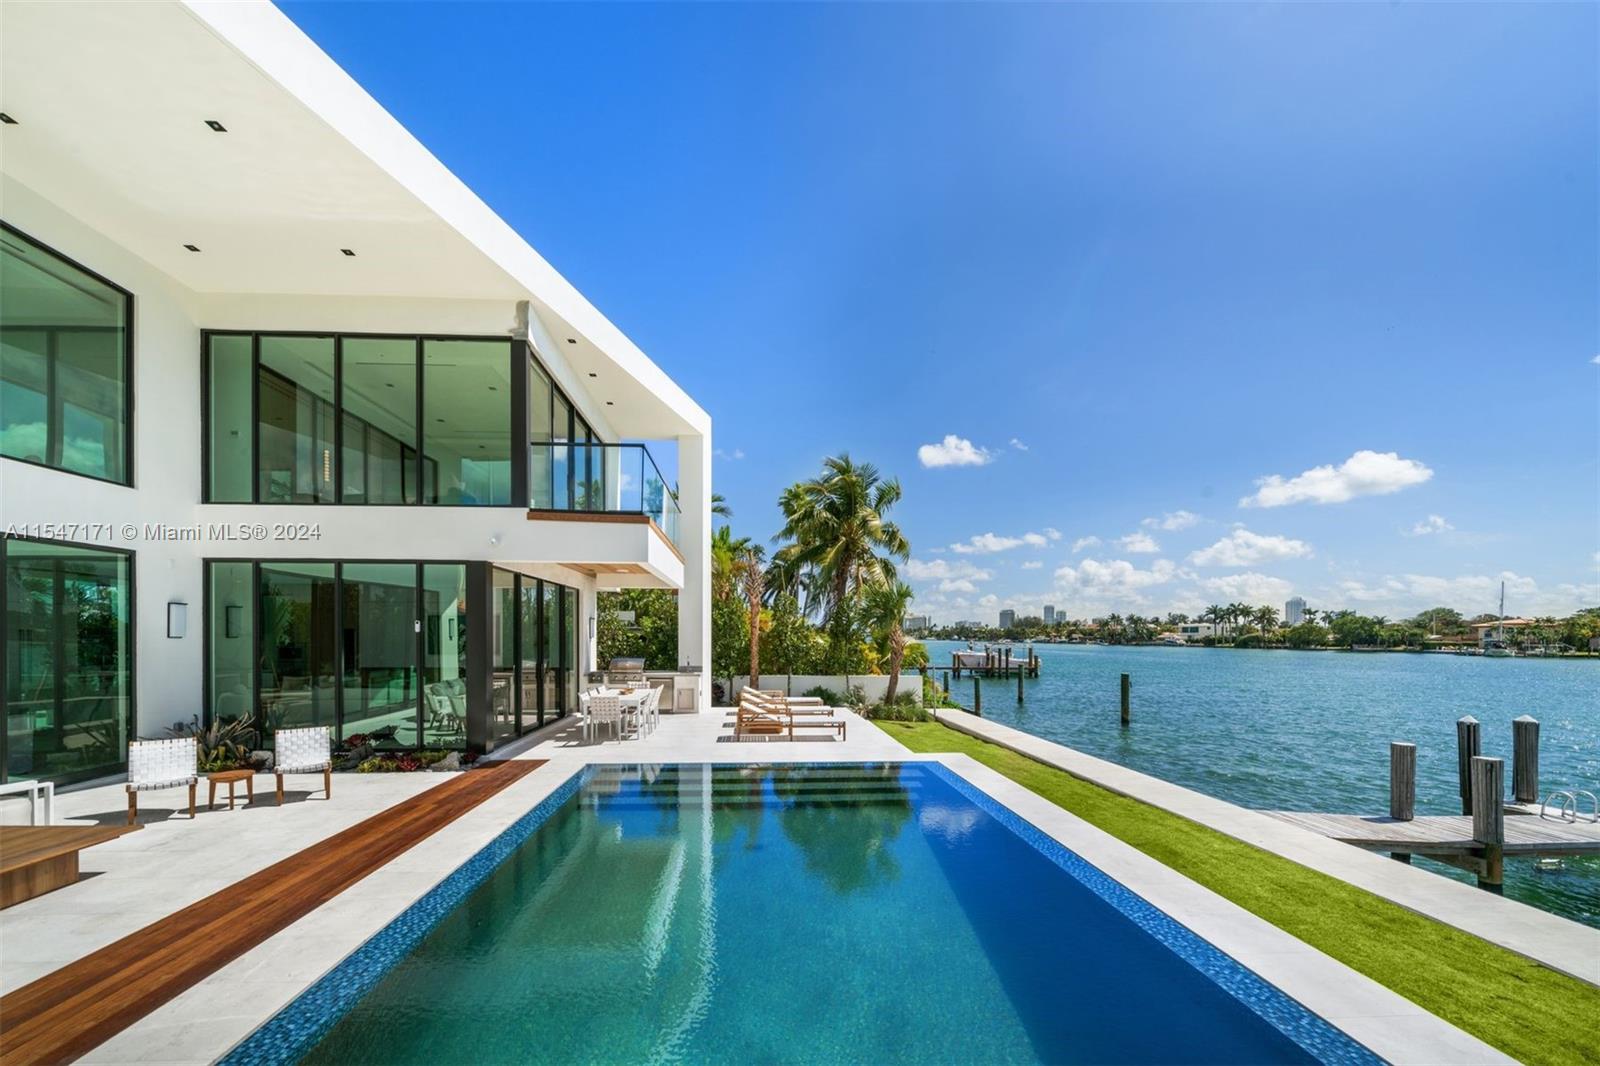 Indulge in opulent waterfront living in this brand-new construction home with a premier lot position on the wide bay in gated Biscayne Point. Enjoy the most sought-after Southern Exposure close to the tip of the island. Designed by Tamara Feldman, this modern masterpiece boasts 7BD/7+1 BA. The exquisite interior features Tundra grey Marble & White oak flooring, white oak wrapped floating staircase, & Carrara marble in all guest bathrooms. The exterior facade is wrapped in stone, complemented by a knife-edge pool & stunning water views. Enjoy a chef’s kitchen w/ marble & custom white oak, top of the line appliances, a media room, staff quarters & full cabana bath. Revel in luxury & sophistication at every turn in this stunning waterfront retreat.